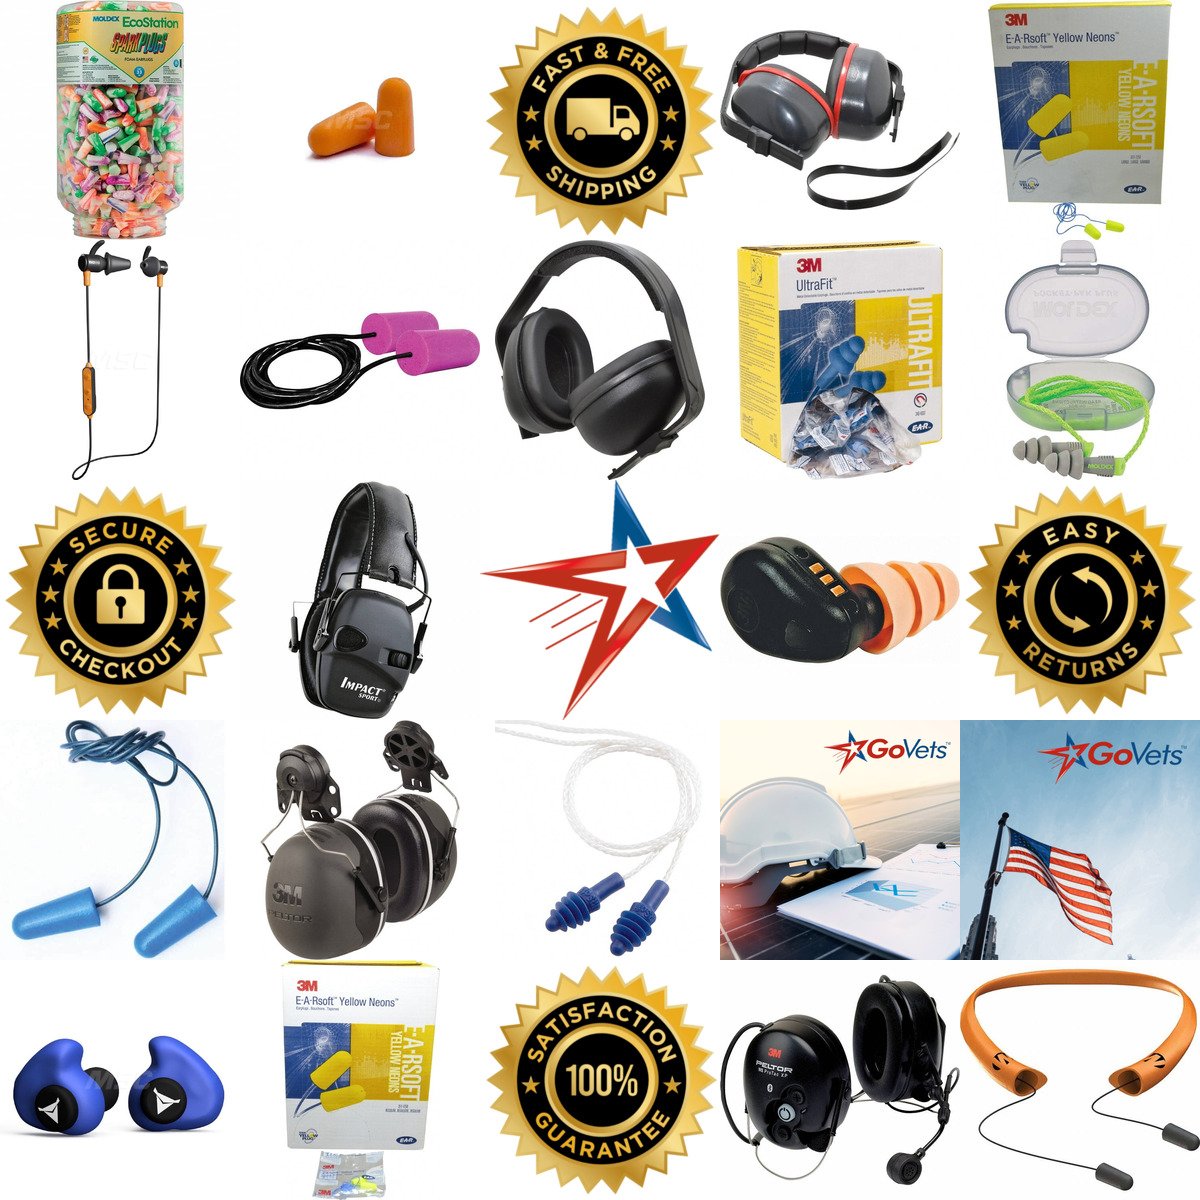 A selection of Hearing Protection products on GoVets